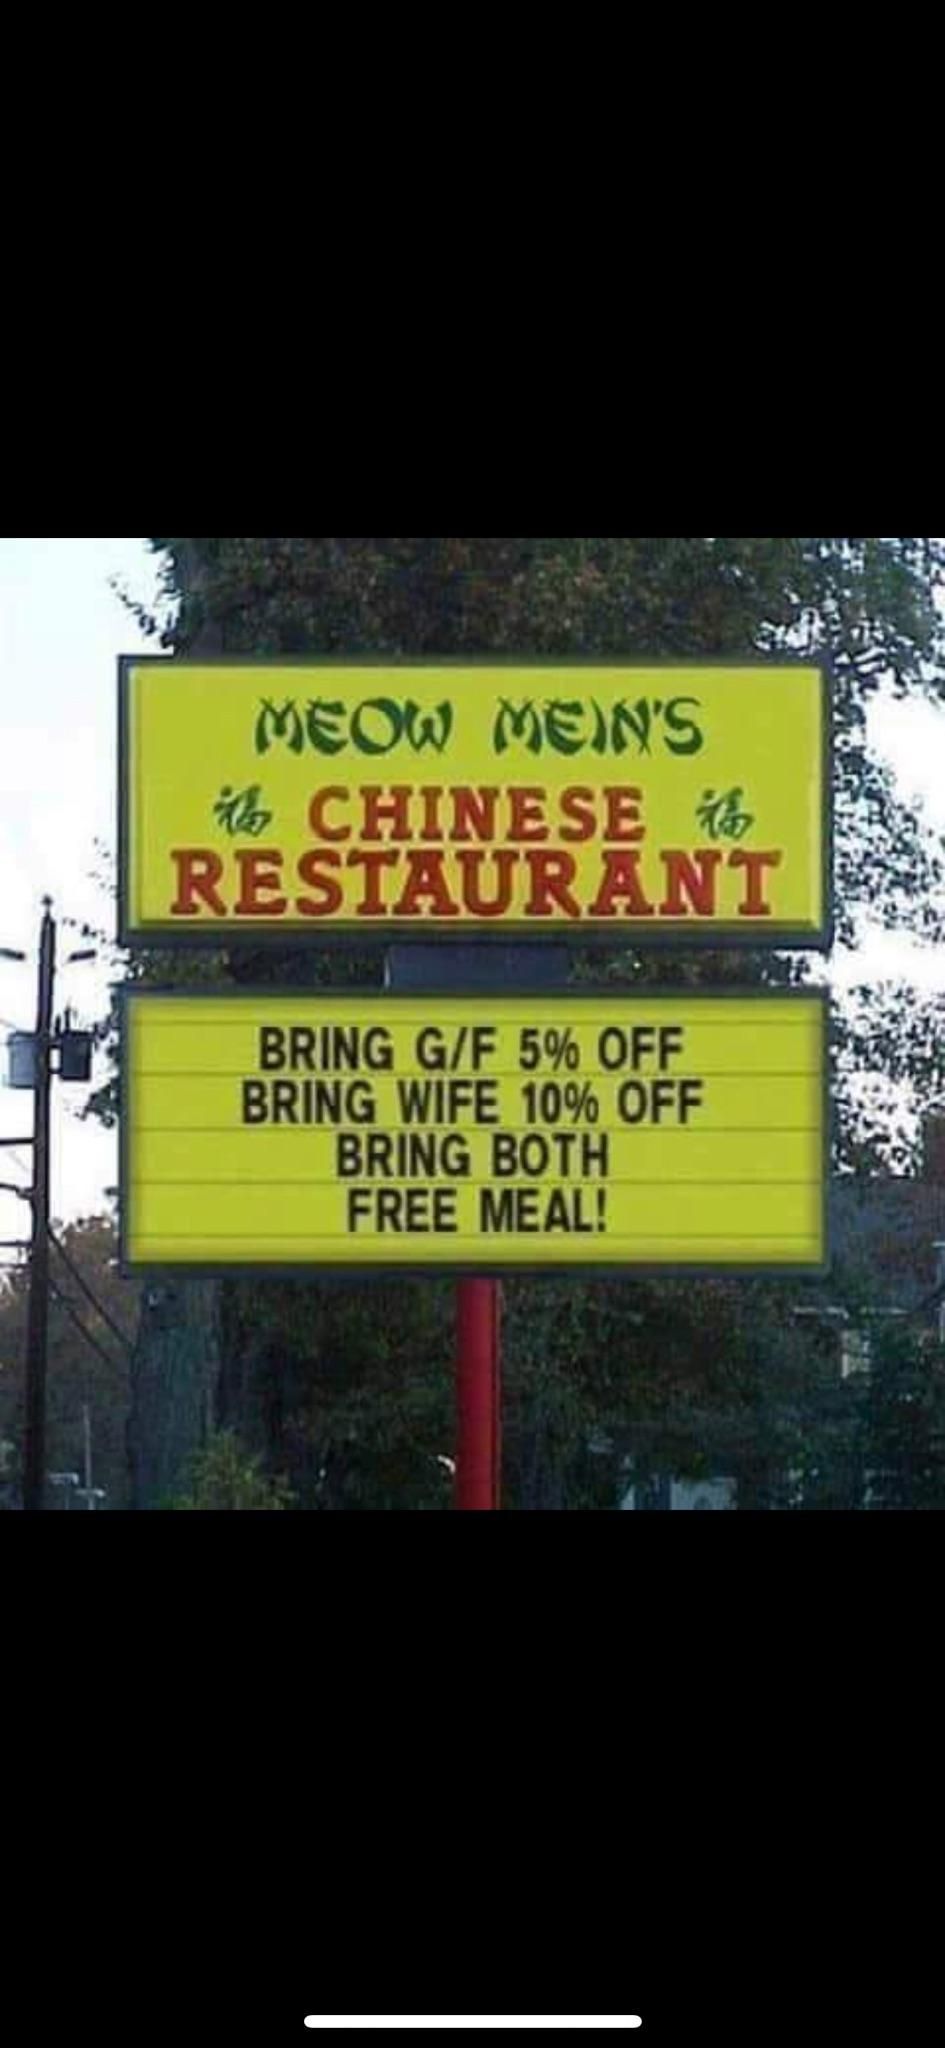 Pretty generous of them to offer a free meal after my wife and g/f have trashed the place